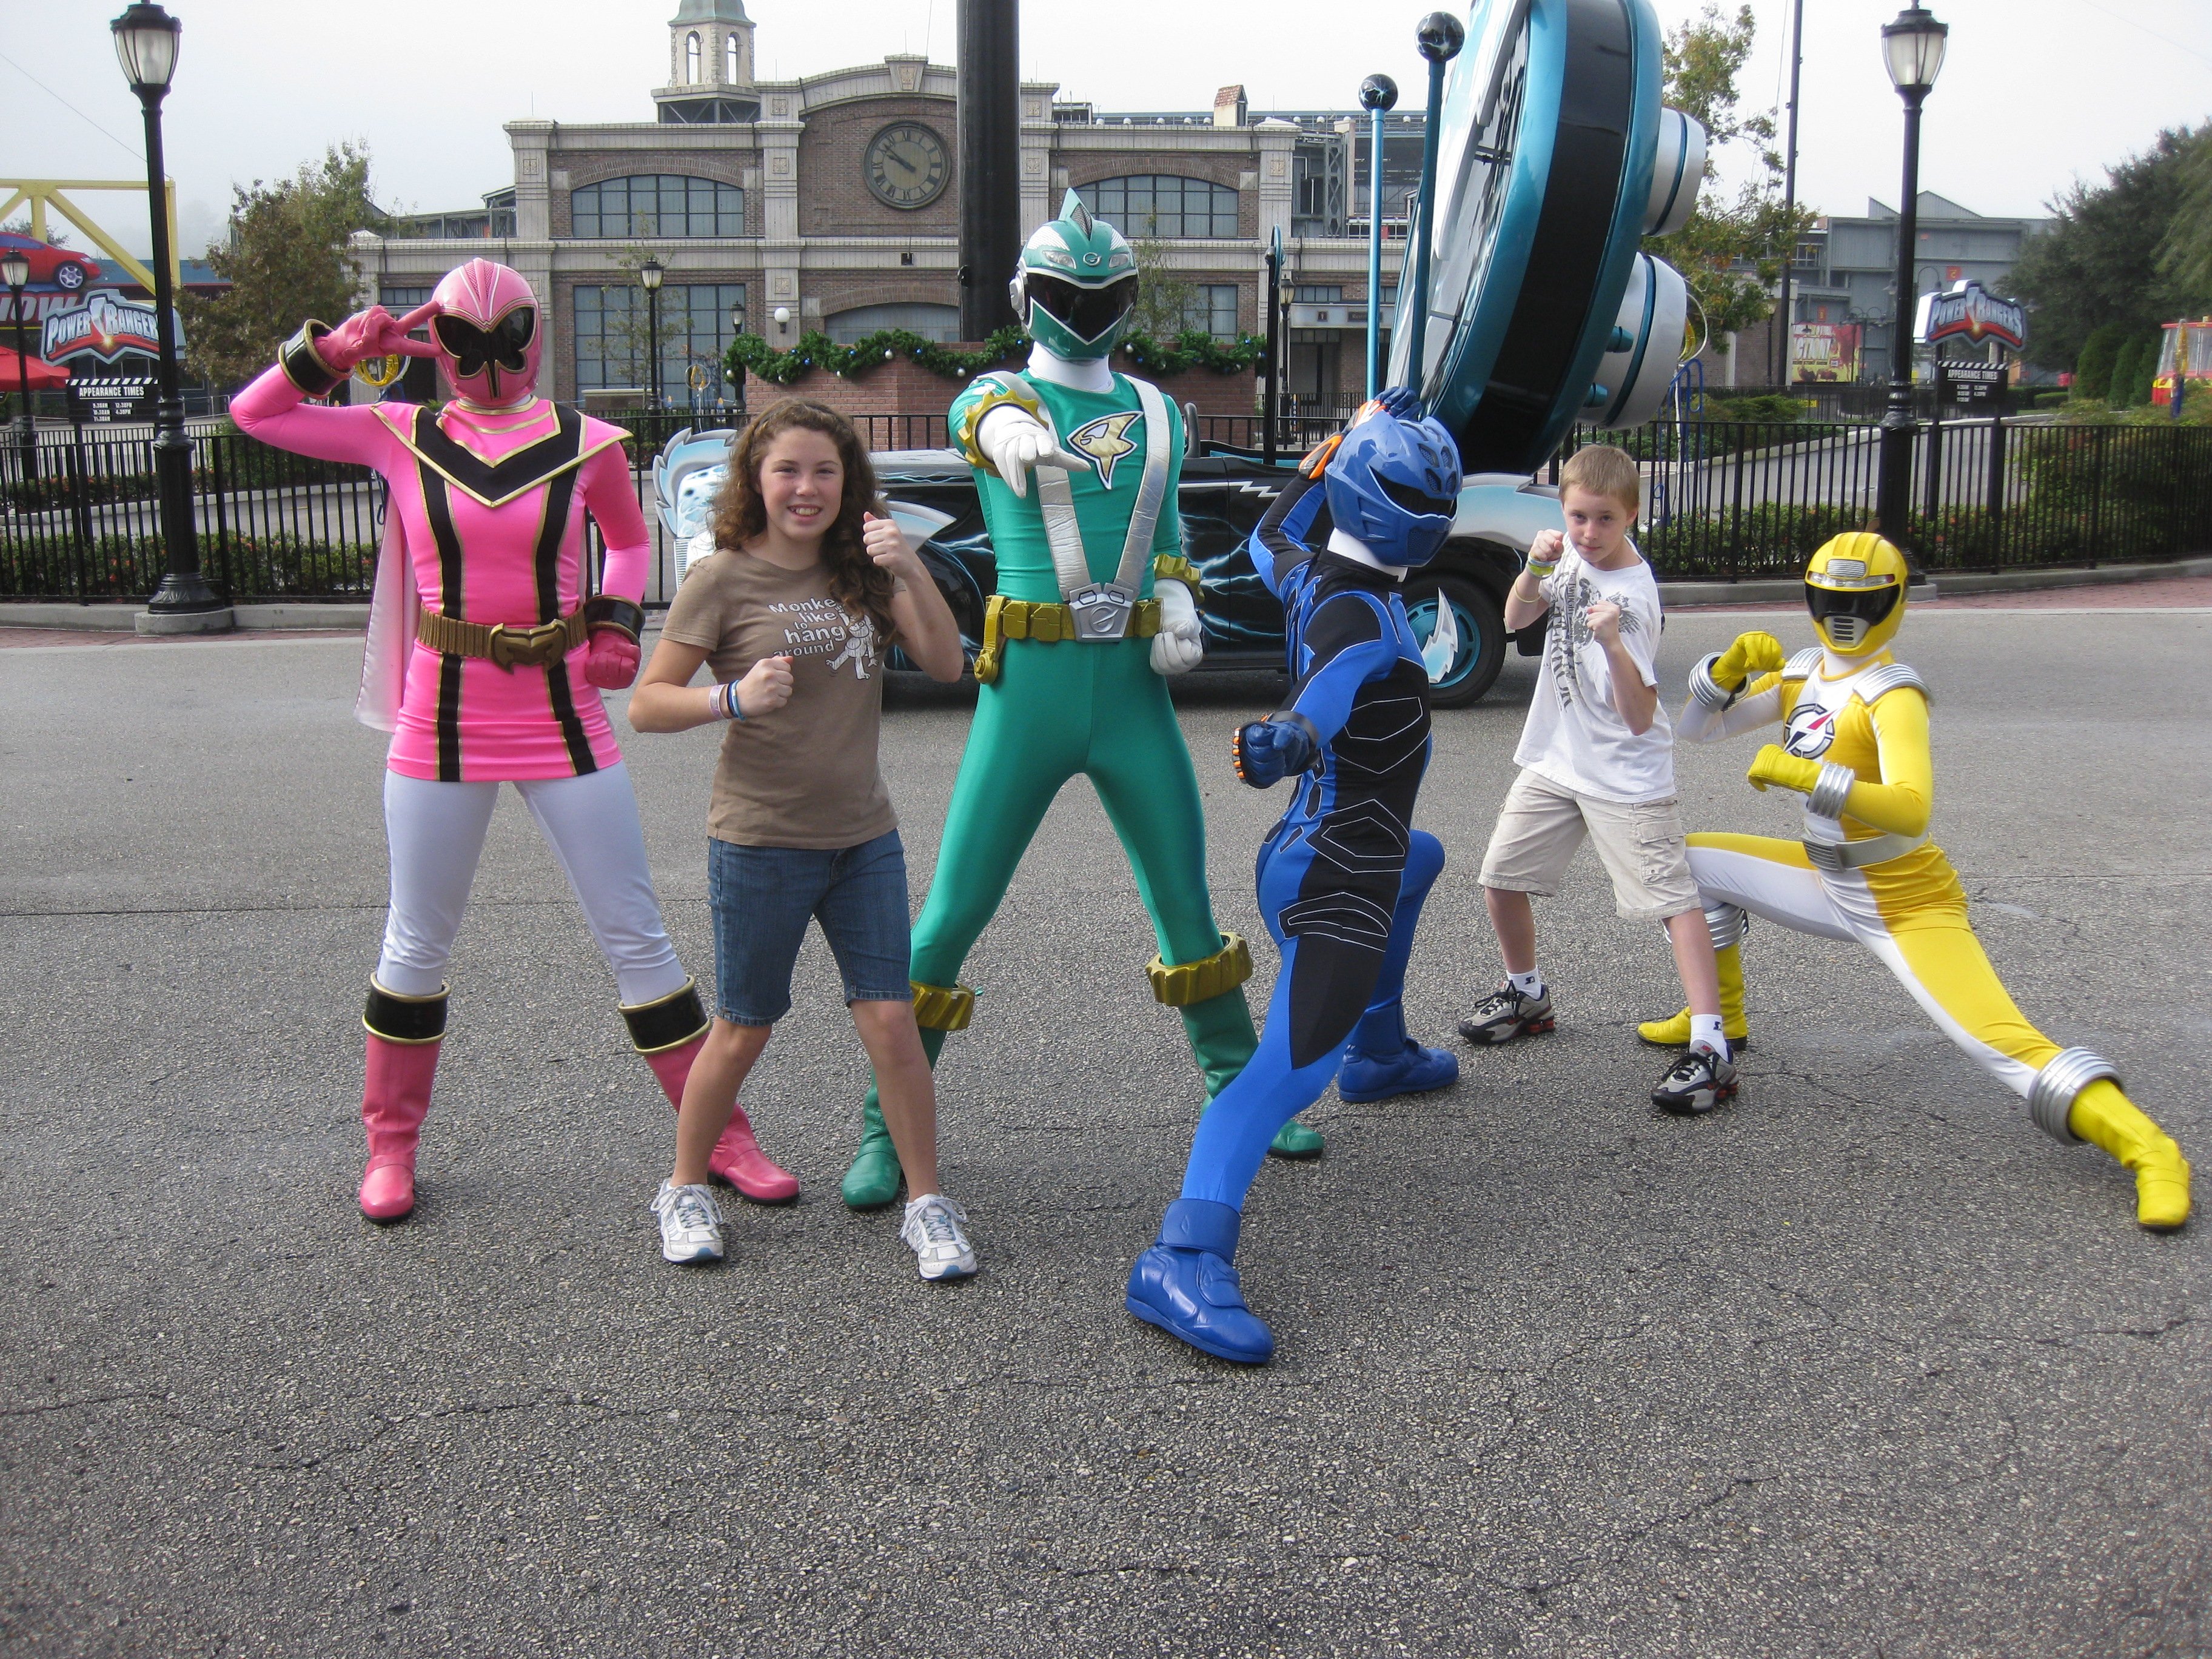 The Power Rangers were my older two children's favorite meet in WDW.  They loved doing the karate style posing with the Rangers before they were retired.  This photo was taken in 2009.